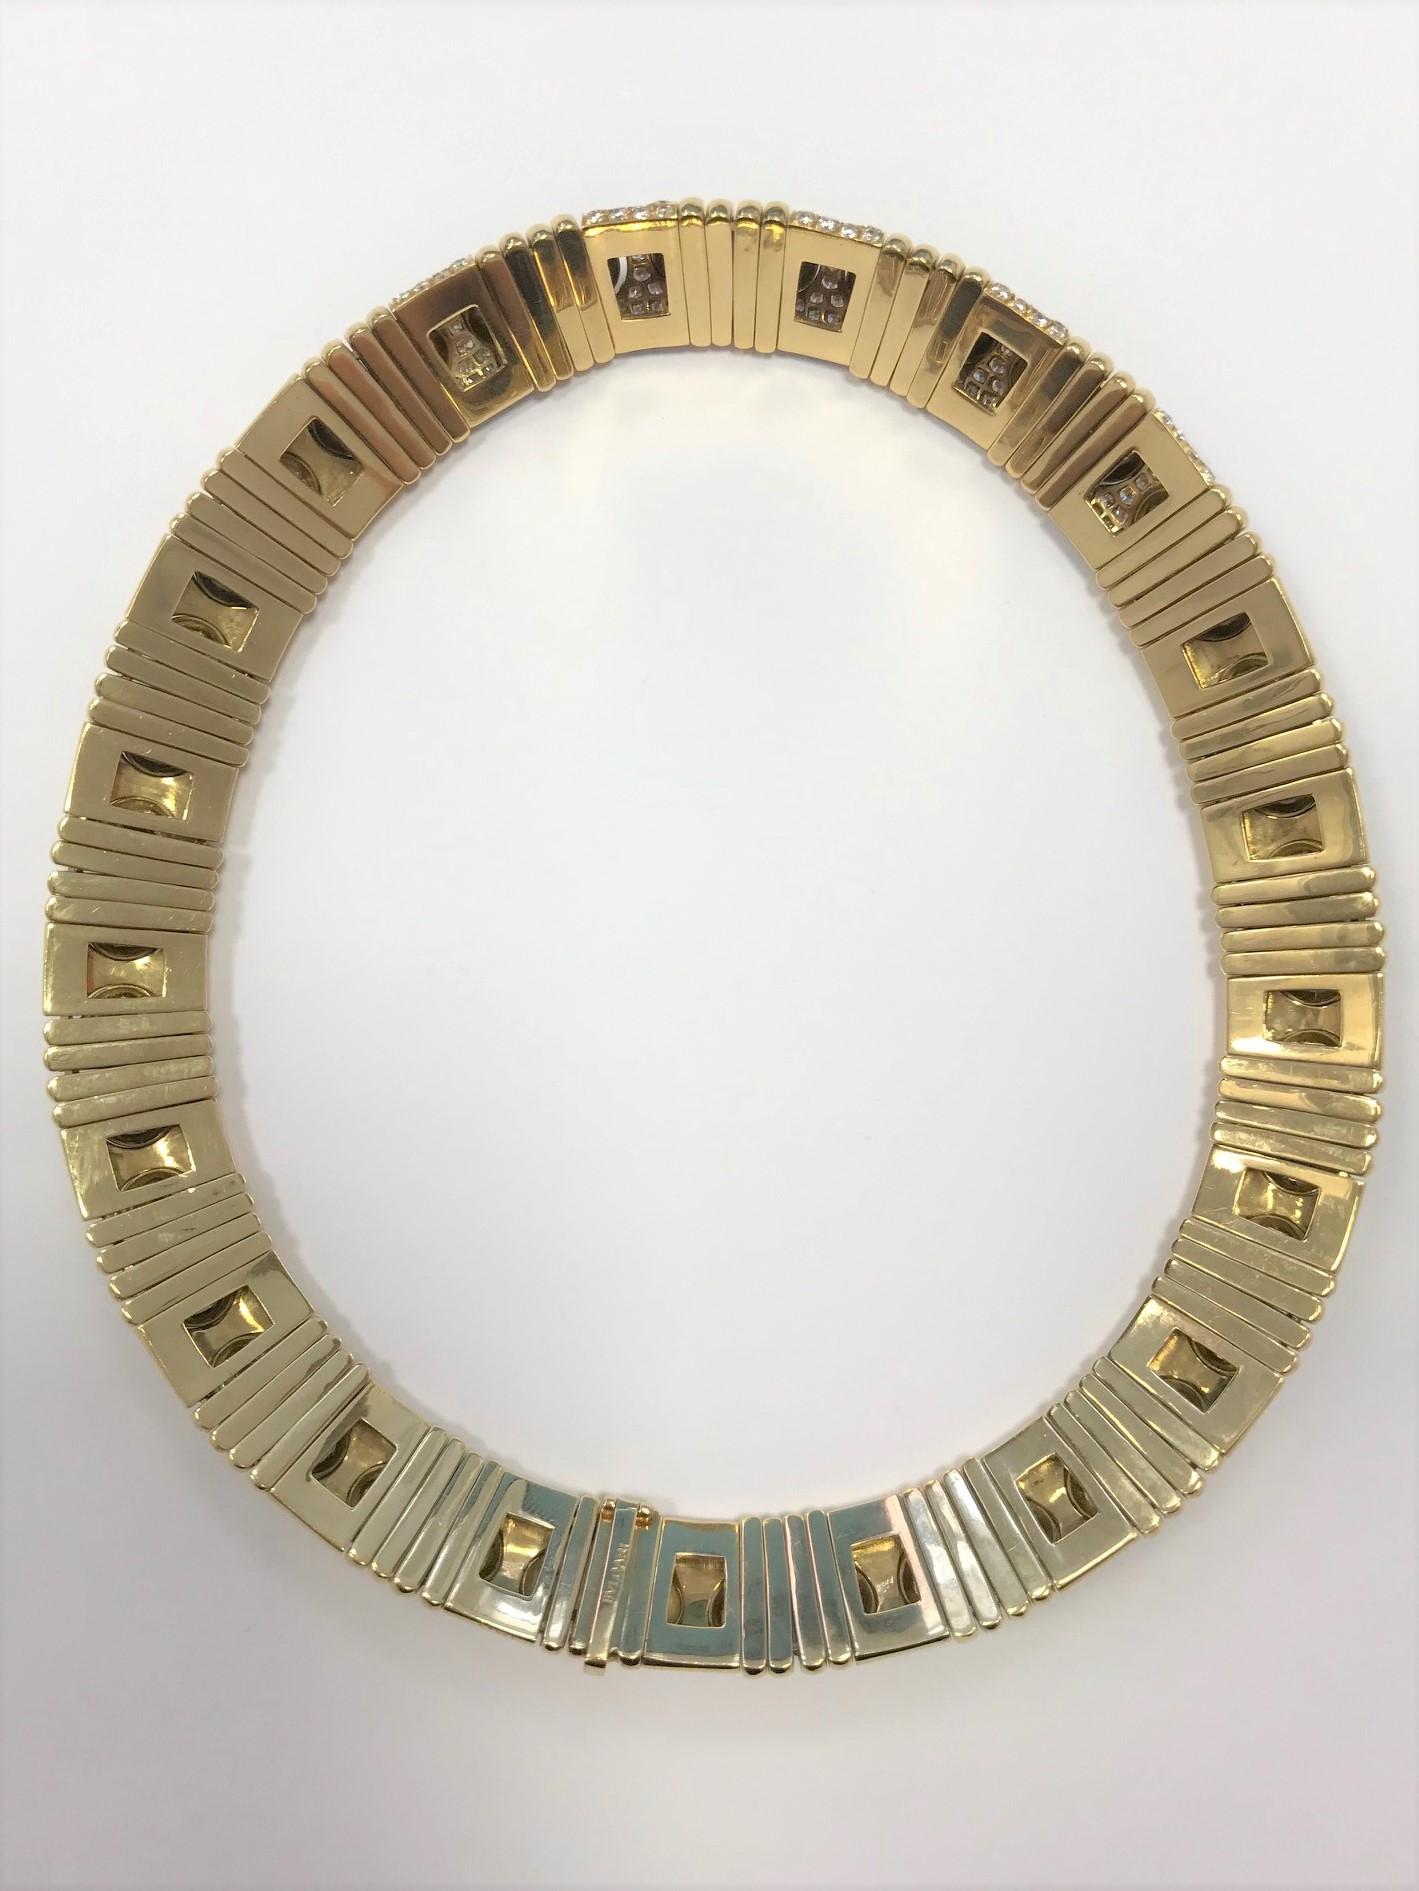 A Bulgari 18 Carat Yellow Gold And Diamond Choker Necklace from the Parentesi collection. Set with approximately 4.5 carats of diamonds. Signed 'Bulgari' '750' and numbered. Inner diameter approximately 10.5 centimetres. Approximately 163.5 grams.